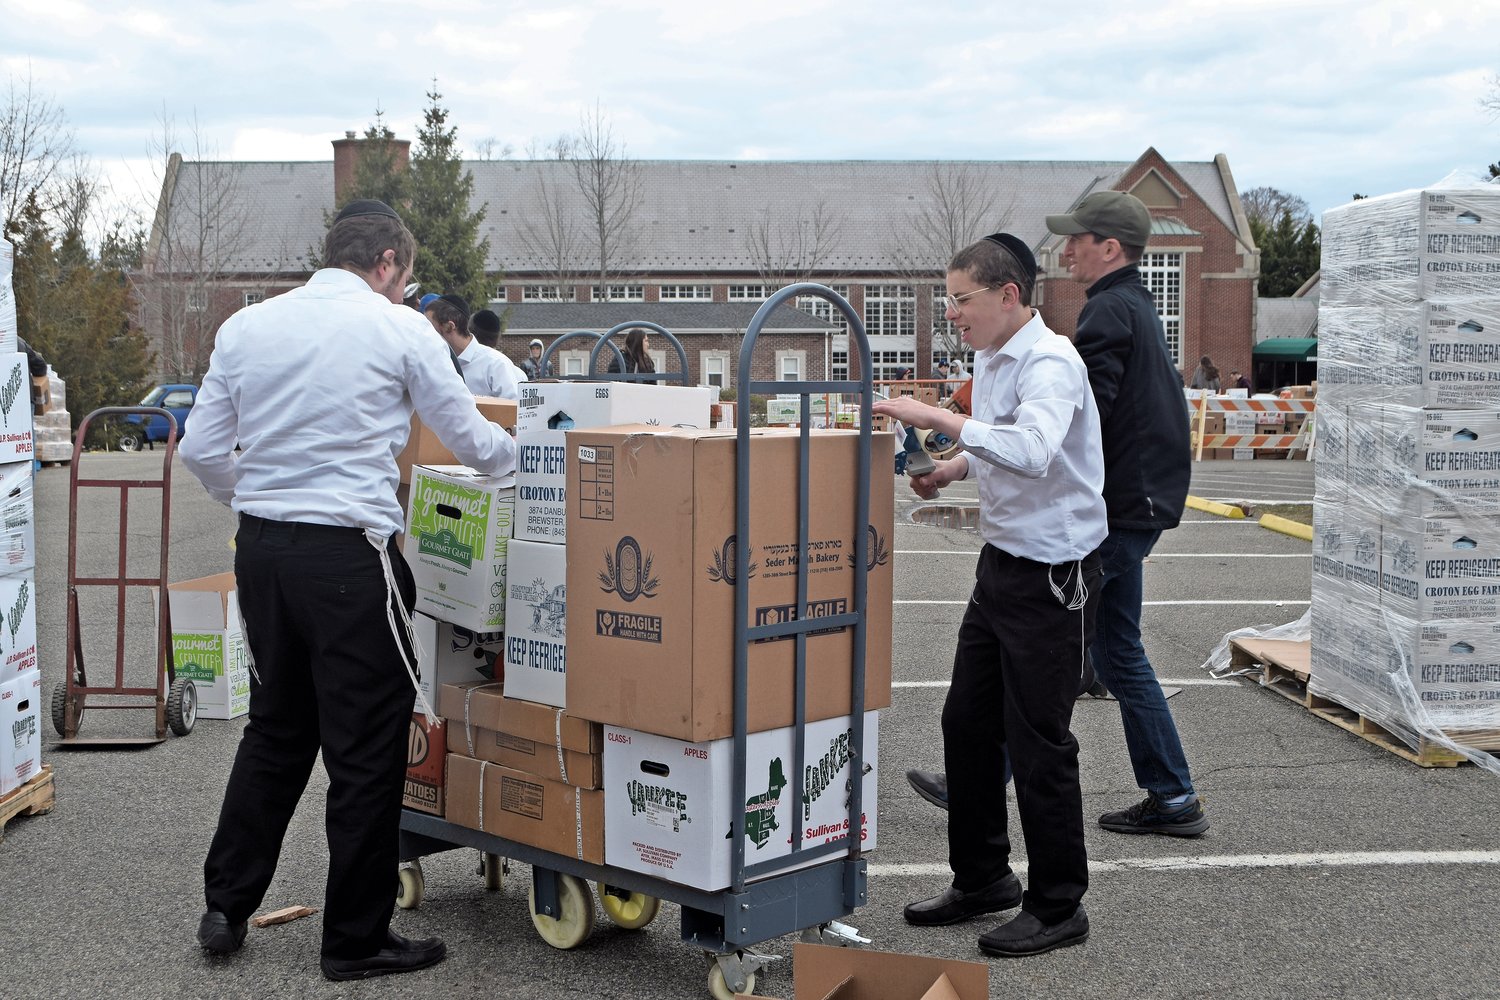 Meshulm Klugman, 15, left, and Chaim Klugman, 13, two of Rabbi Simcha Lefkowitz’s grandchildren, checked boxes with food orders and taped them closed.